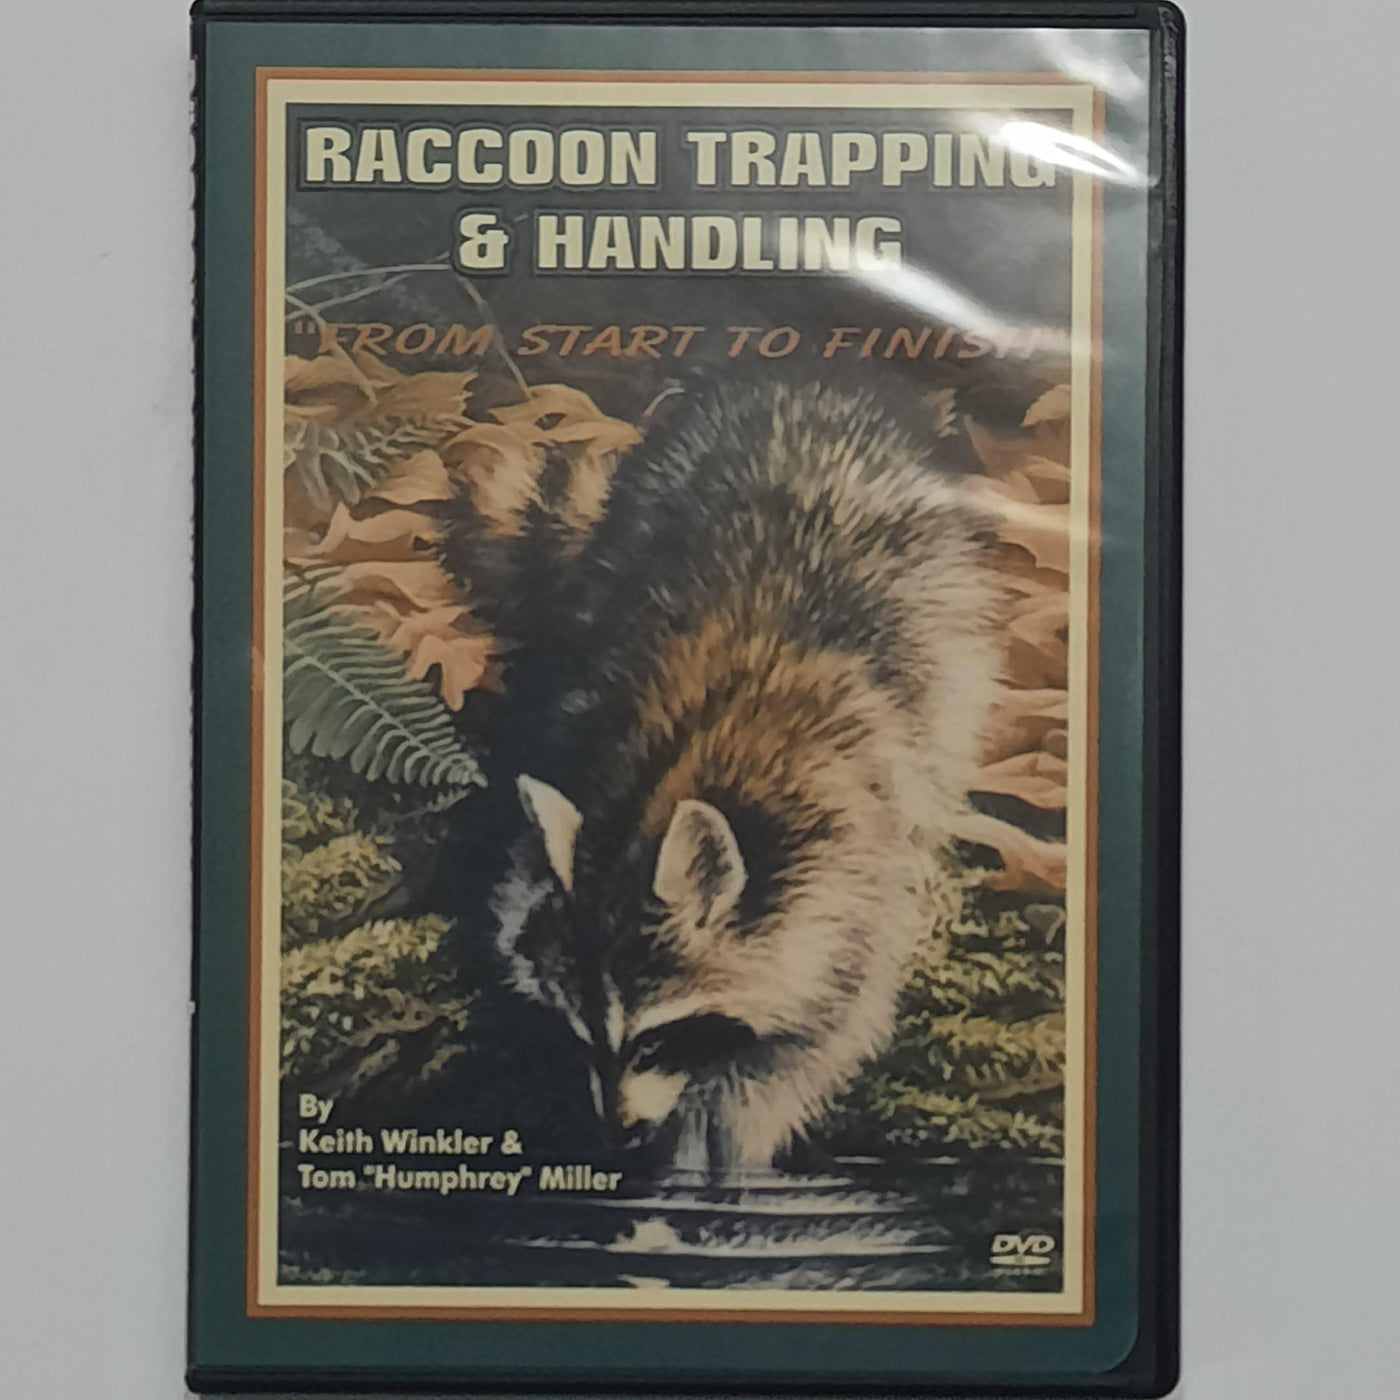 Raccoon Trapping & Handling From Start to Finish - Winkler - DVD - IronTrail Trapline Supply, LLC